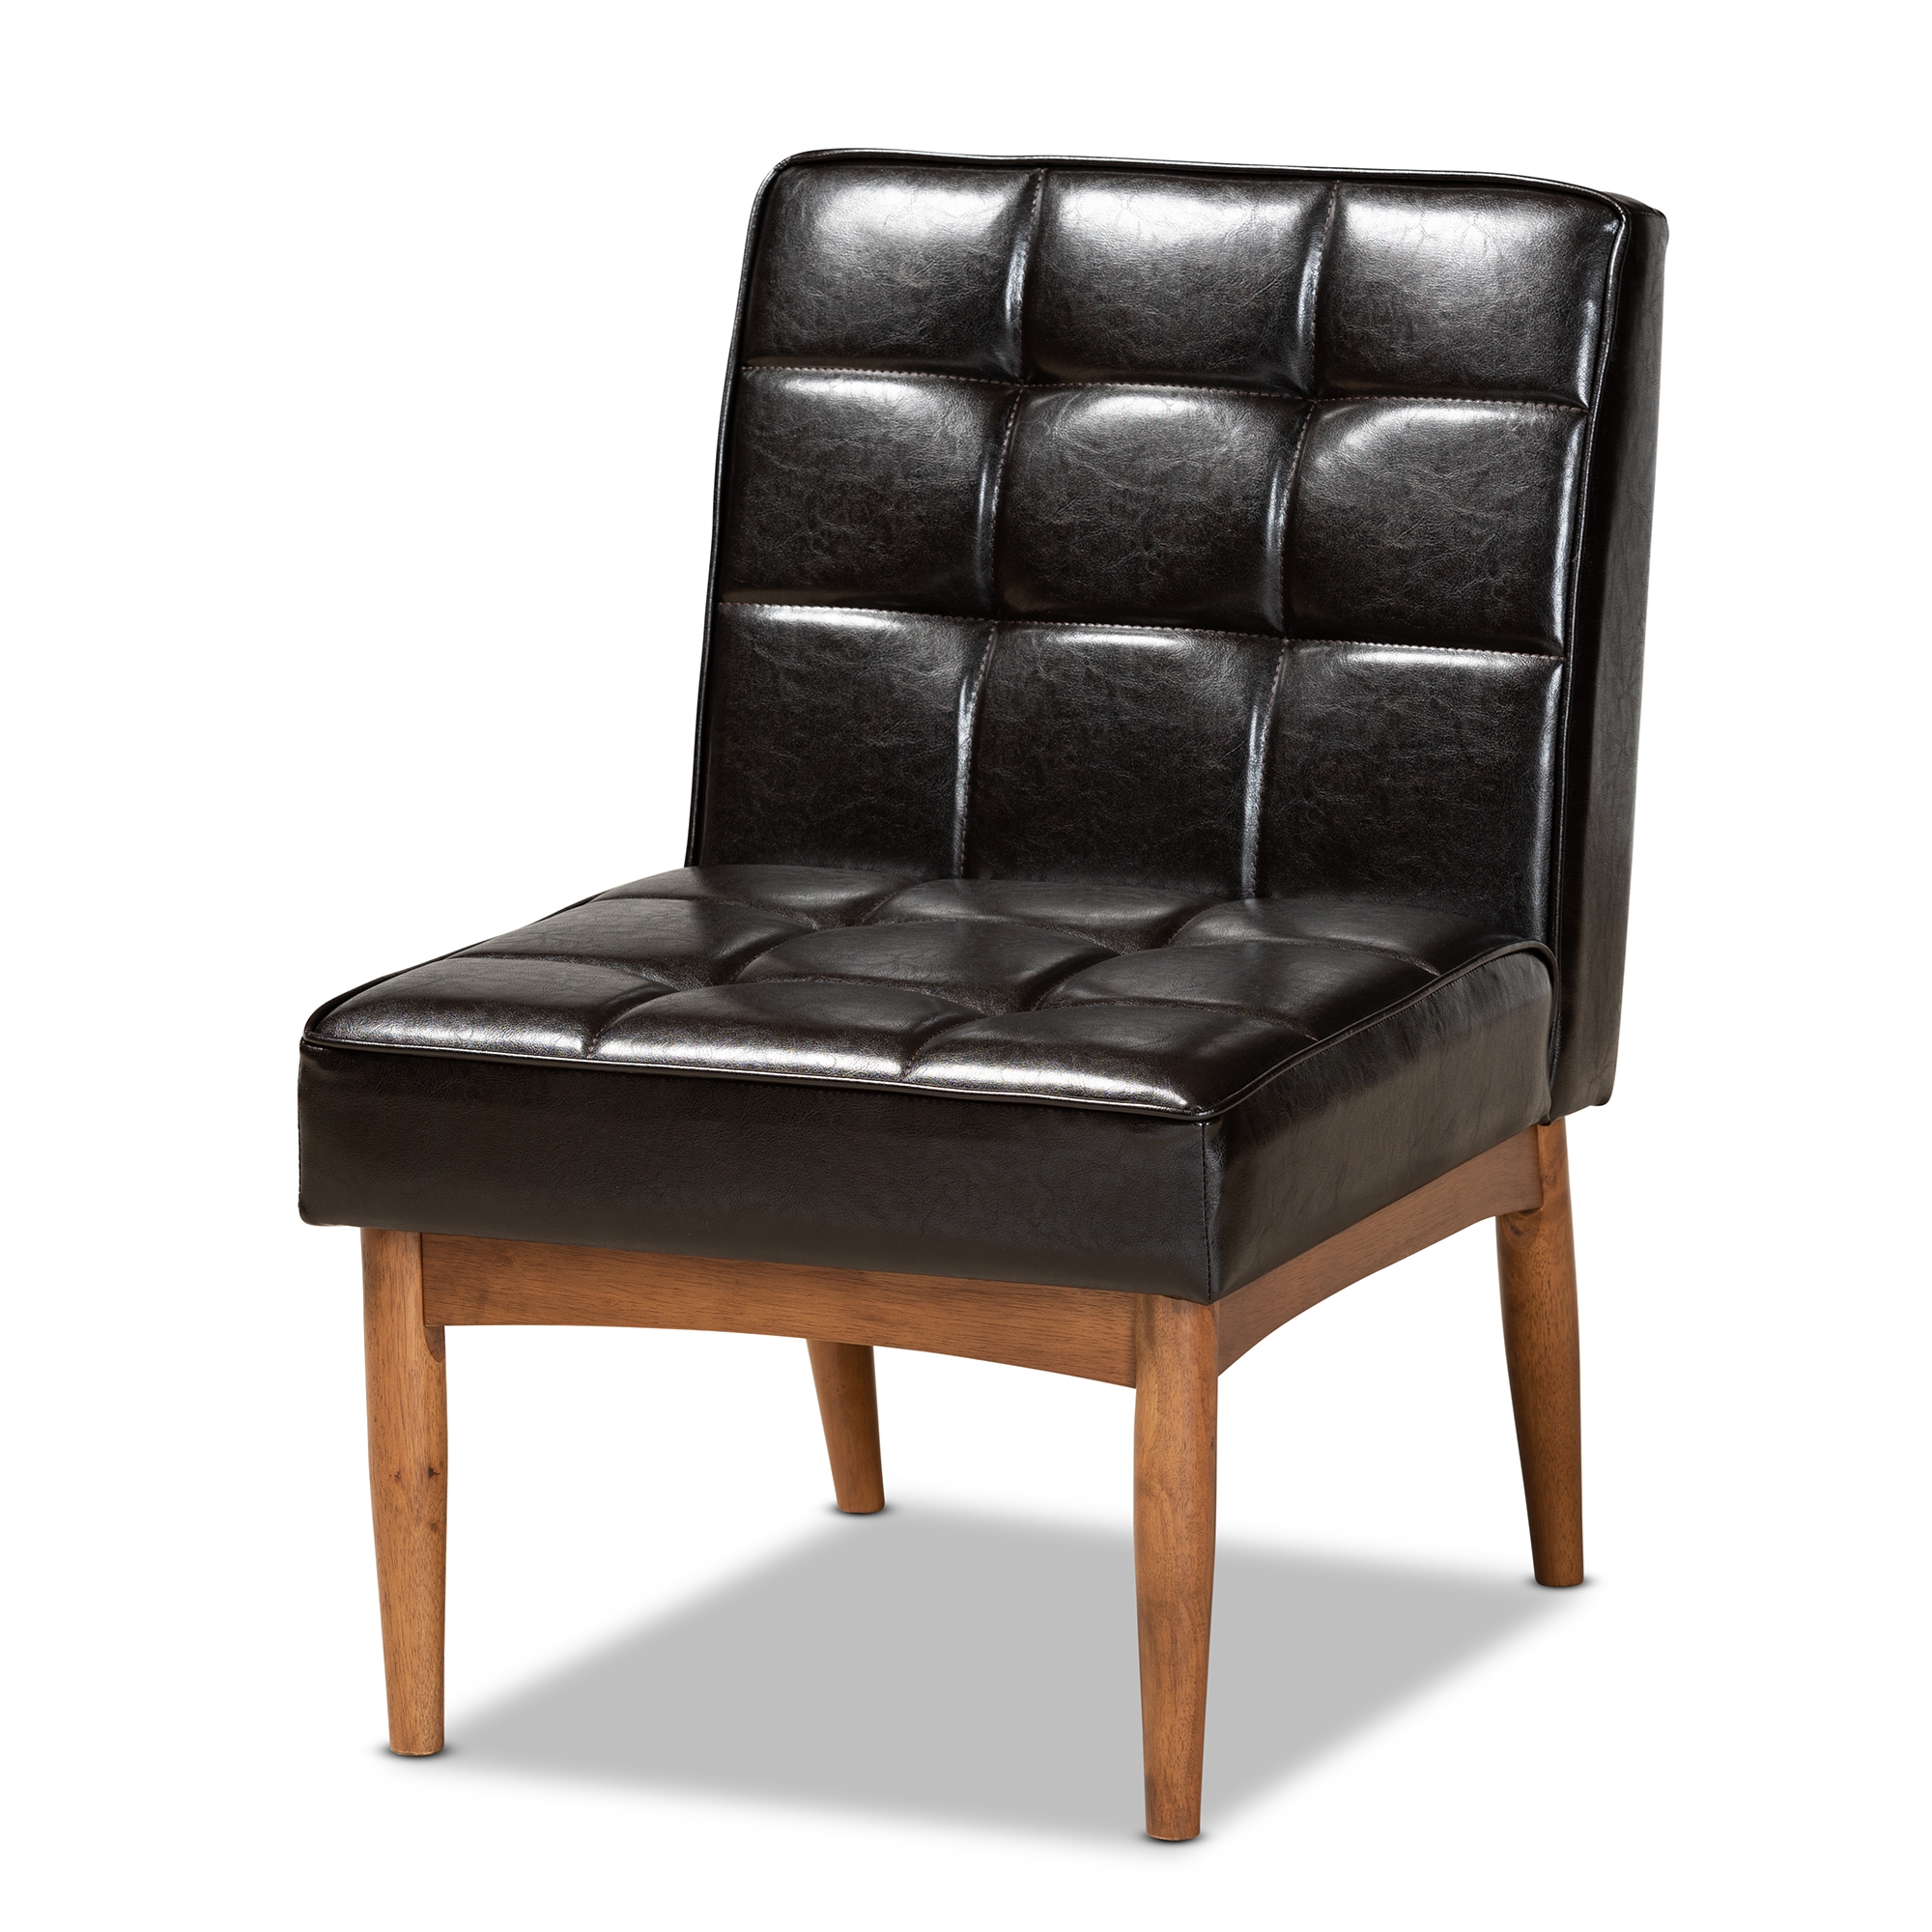 Baxton Studio Sanford Mid-Century Modern Dark Brown Faux Leather Upholstered and Walnut Brown Finished Wood Dining Chair